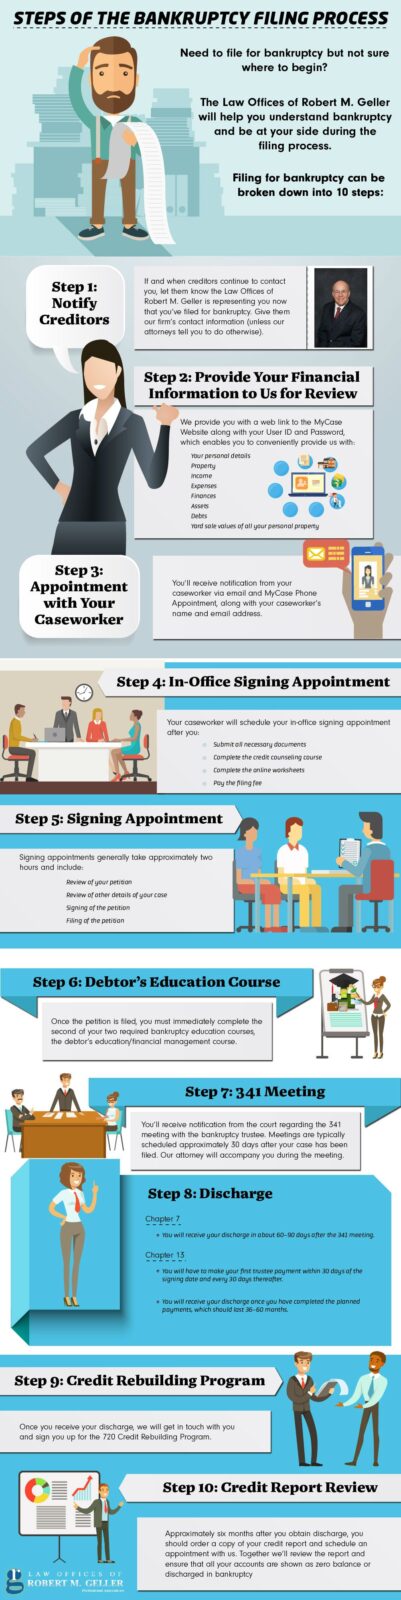 The Bankruptcy Filing Process In Florida Infographic.